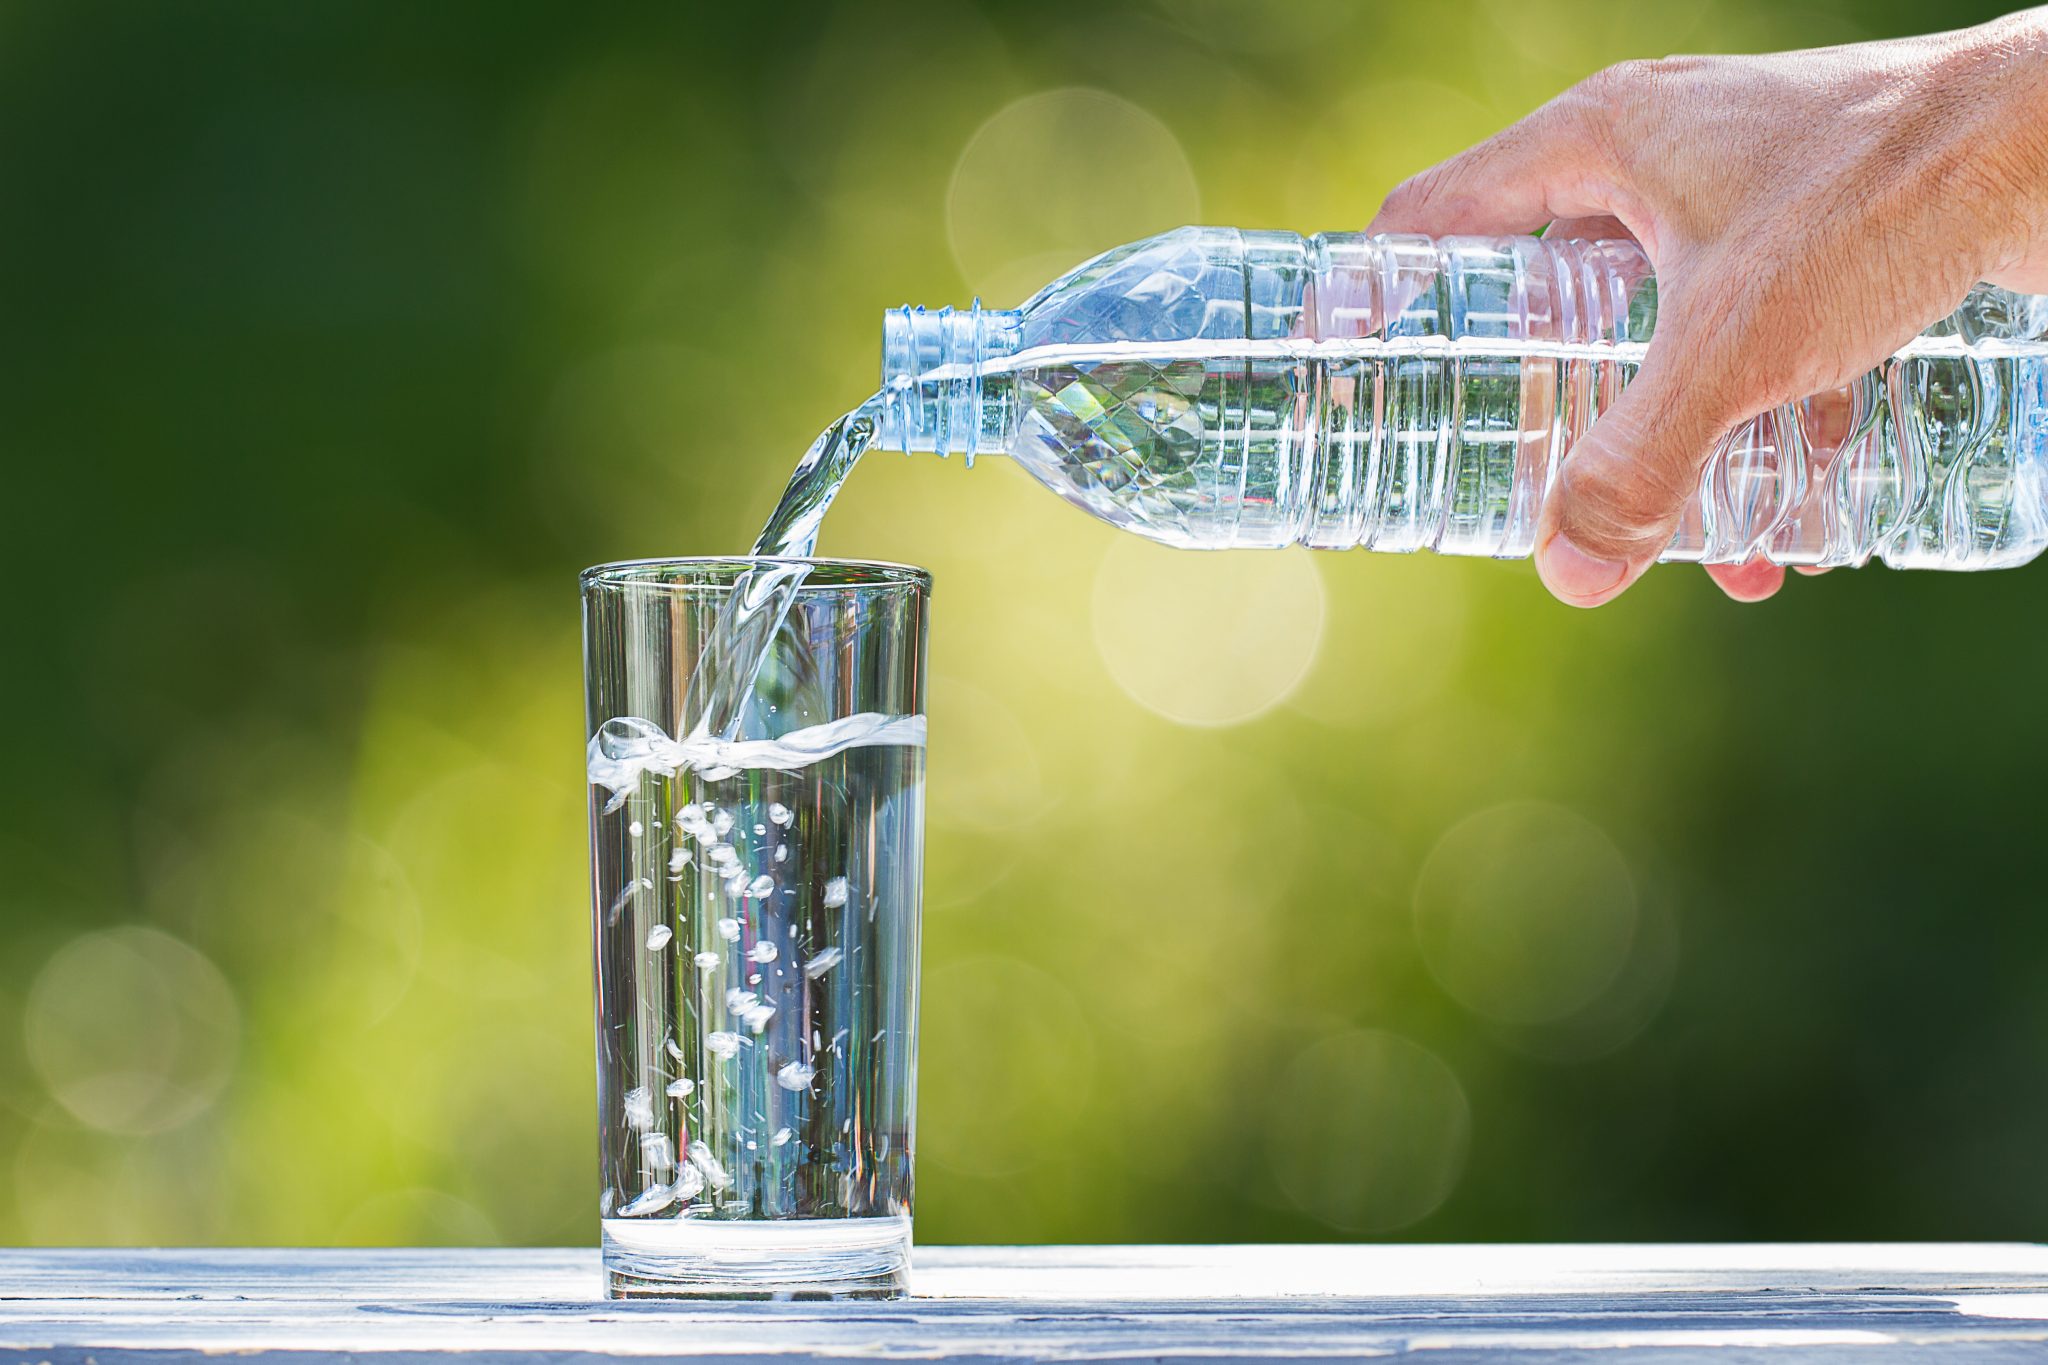 How to Incorporate More Water into Your Daily Routine